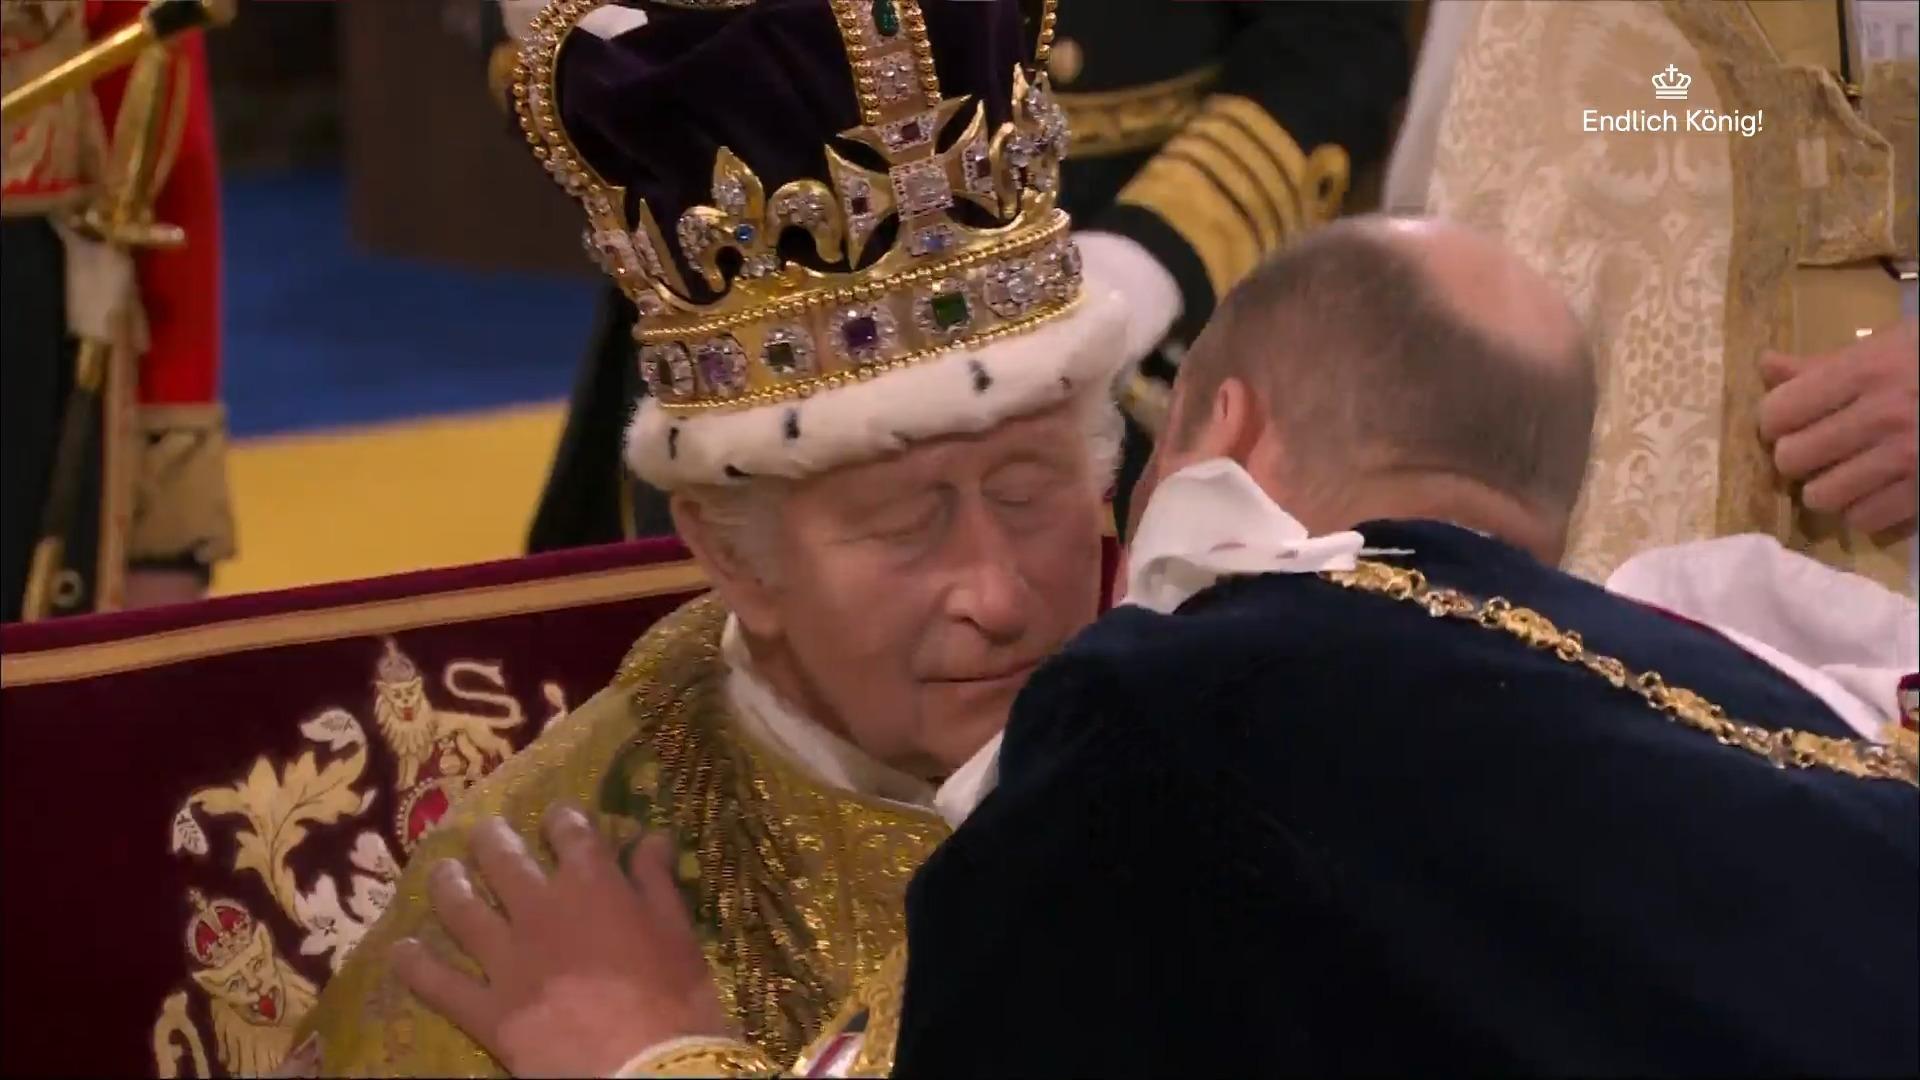 His son William swore allegiance to him, a special moment for King Charles